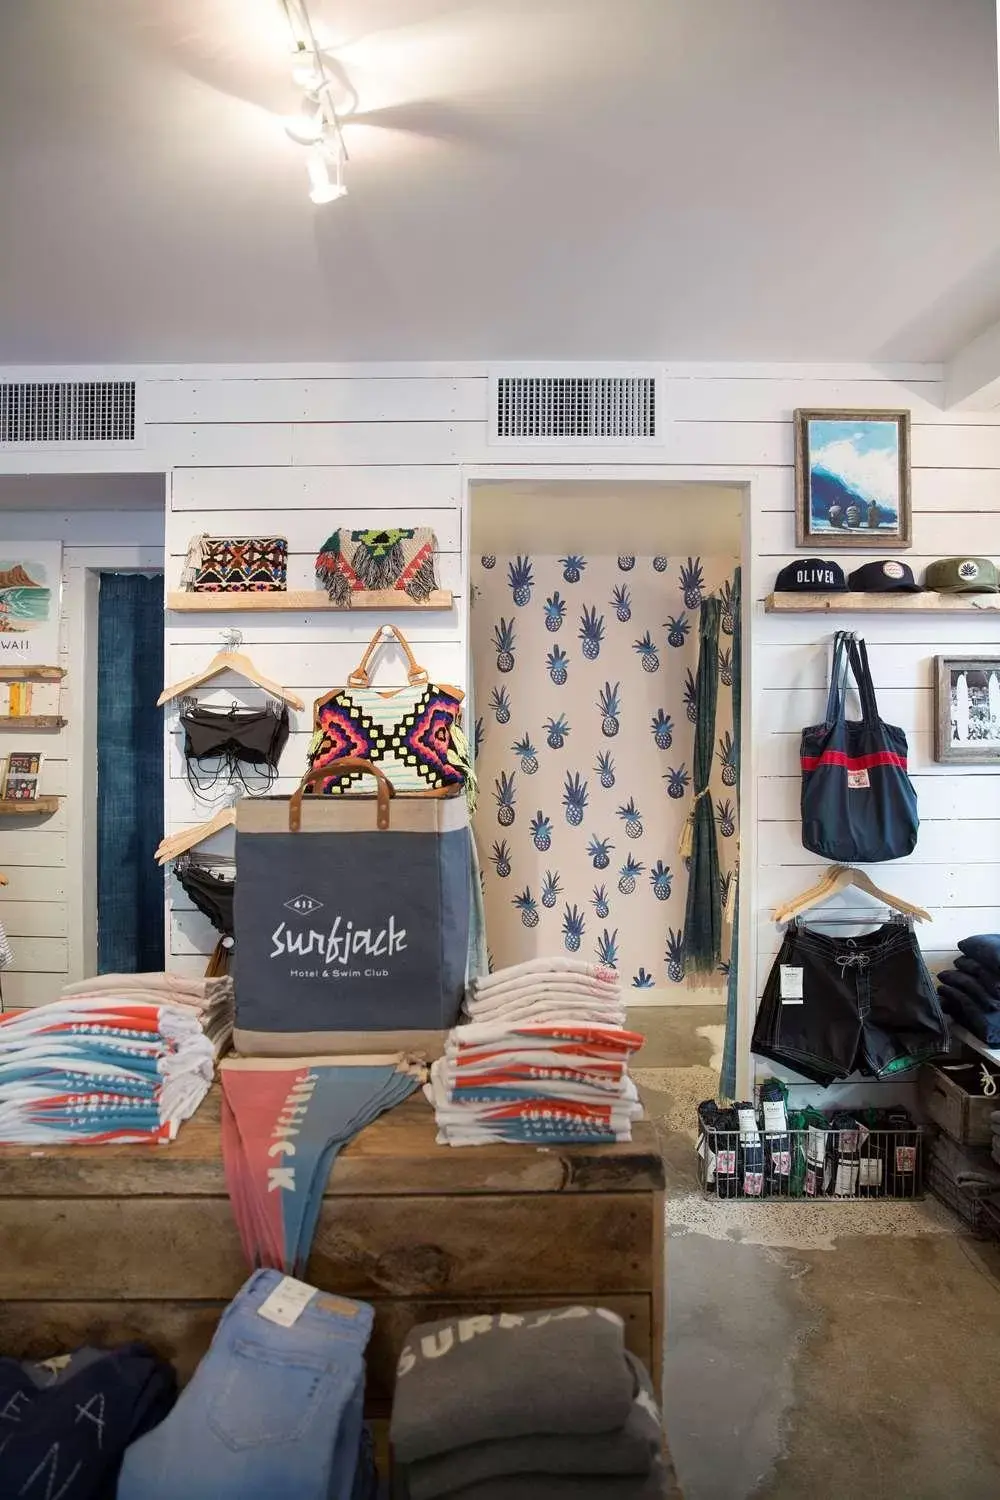 On-site shops in The Surfjack Hotel & Swim Club